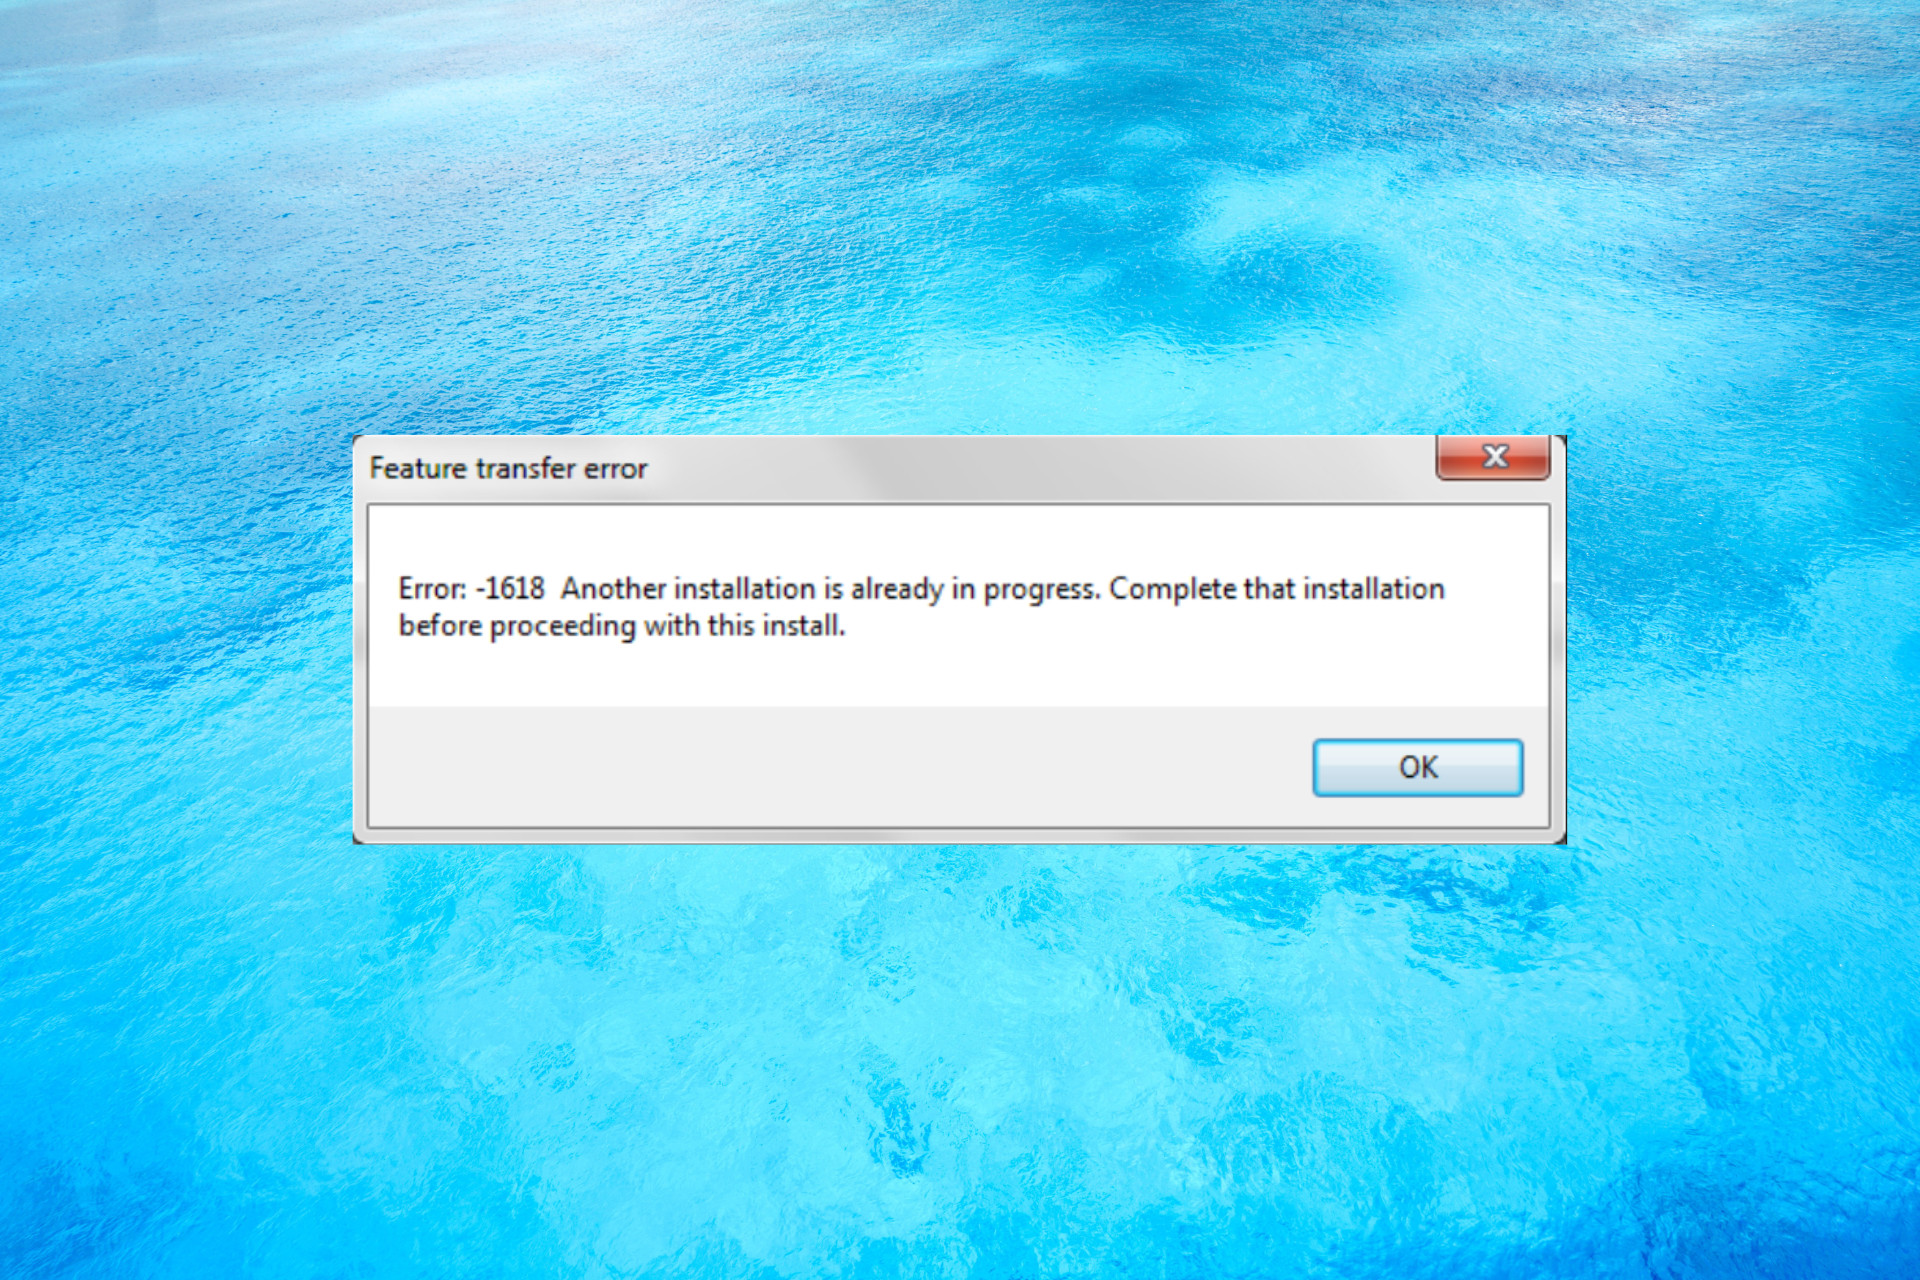 Roblox Installer Cannot continue installation because another